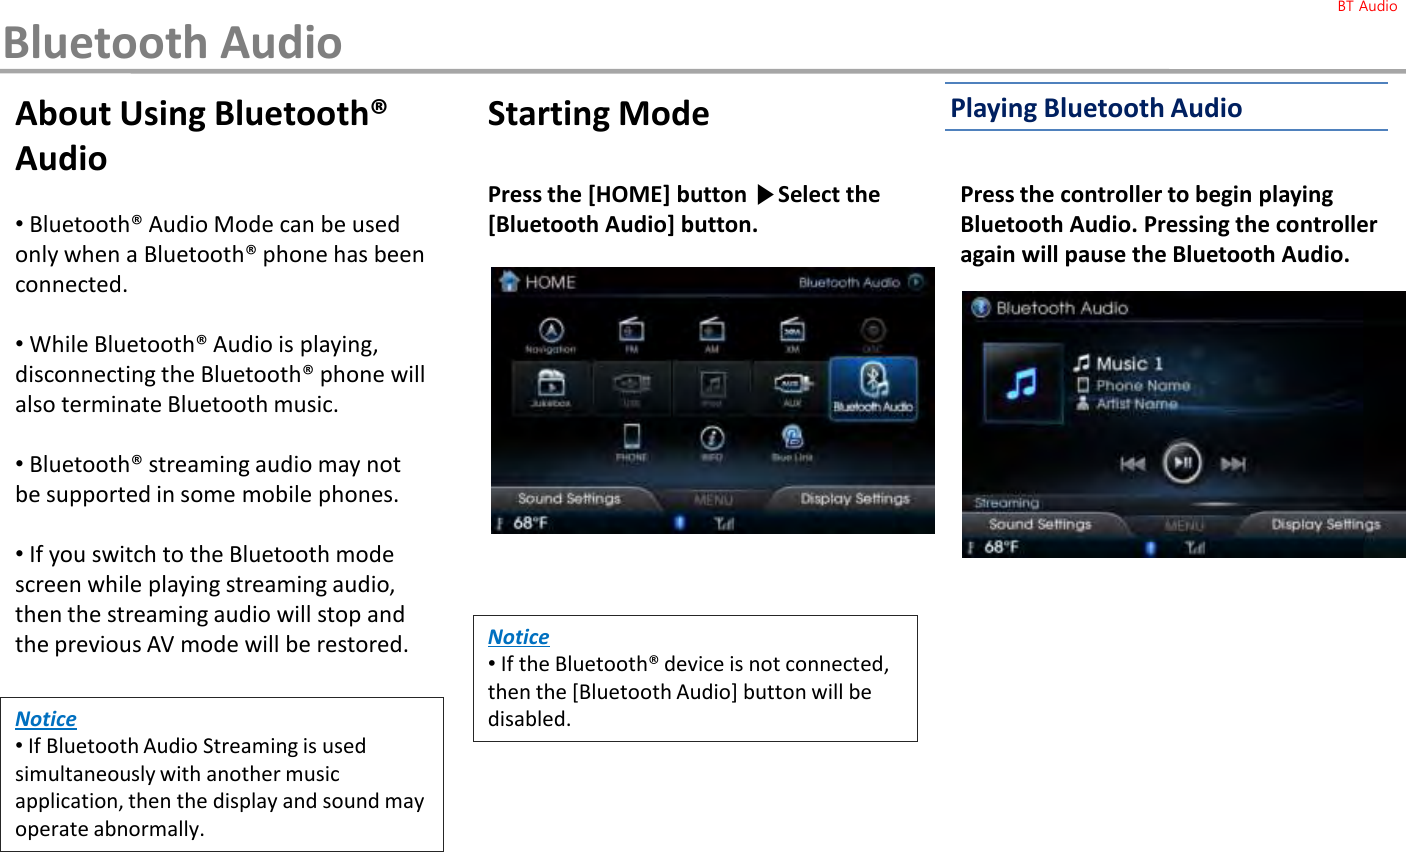 About Using Bluetooth® Audio•Bluetooth® Audio Mode can be used only when a Bluetooth® phone has been connected.•While Bluetooth® Audio is playing, disconnecting the Bluetooth® phone will also terminate Bluetooth music.•Bluetooth® streaming audio may not be supported in some mobile phones.•If you switch to the Bluetooth mode screen while playing streaming audio, then the streaming audio will stop and the previous AV mode will be restored. Starting ModePress the [HOME] button ▶Select the [Bluetooth Audio] button.Press the controller to begin playing Bluetooth Audio. Pressing the controller again will pause the Bluetooth Audio.Notice•If the Bluetooth® device is not connected, then the [Bluetooth Audio] button will be disabled.Notice•If Bluetooth Audio Streaming is used simultaneously with another music application, then the display and sound may operate abnormally. Playing Bluetooth AudioBluetooth AudioBT Audio